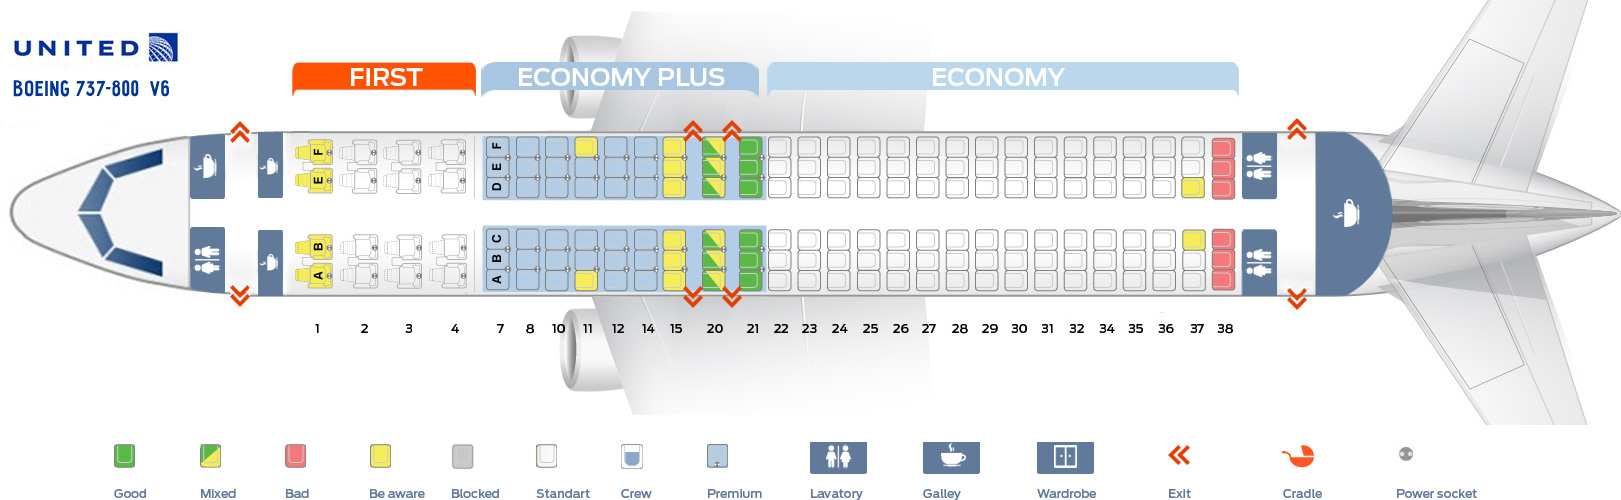 Seat Map Boeing 737 800 United Airlines Best Seats In Plane